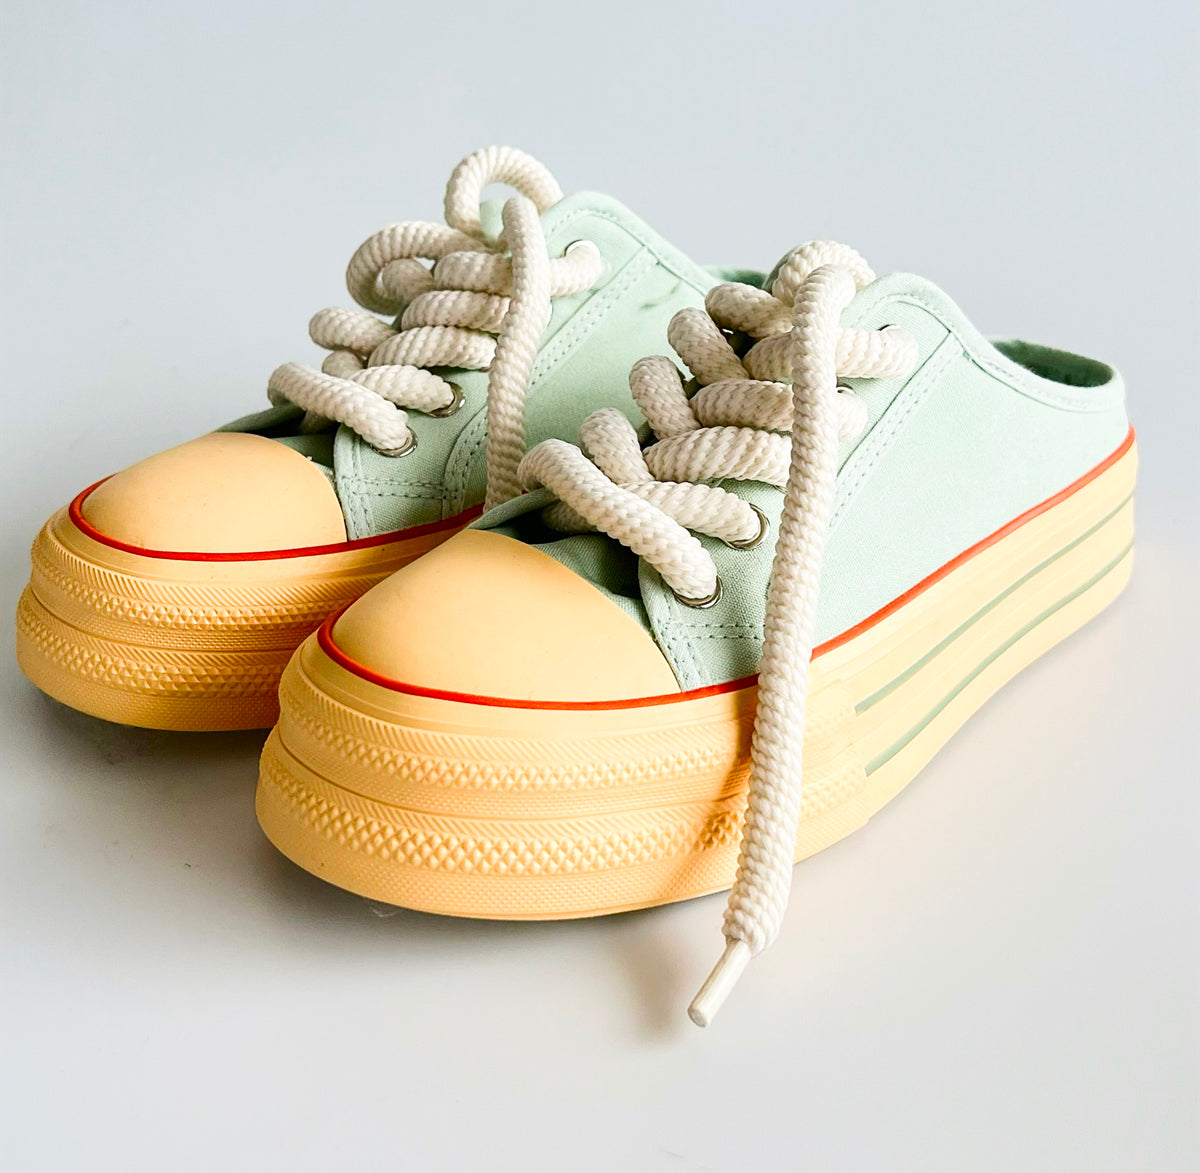 Classic Platform Sneakers - Mint Green-250 Shoes-Chasing Bandits-Coastal Bloom Boutique, find the trendiest versions of the popular styles and looks Located in Indialantic, FL